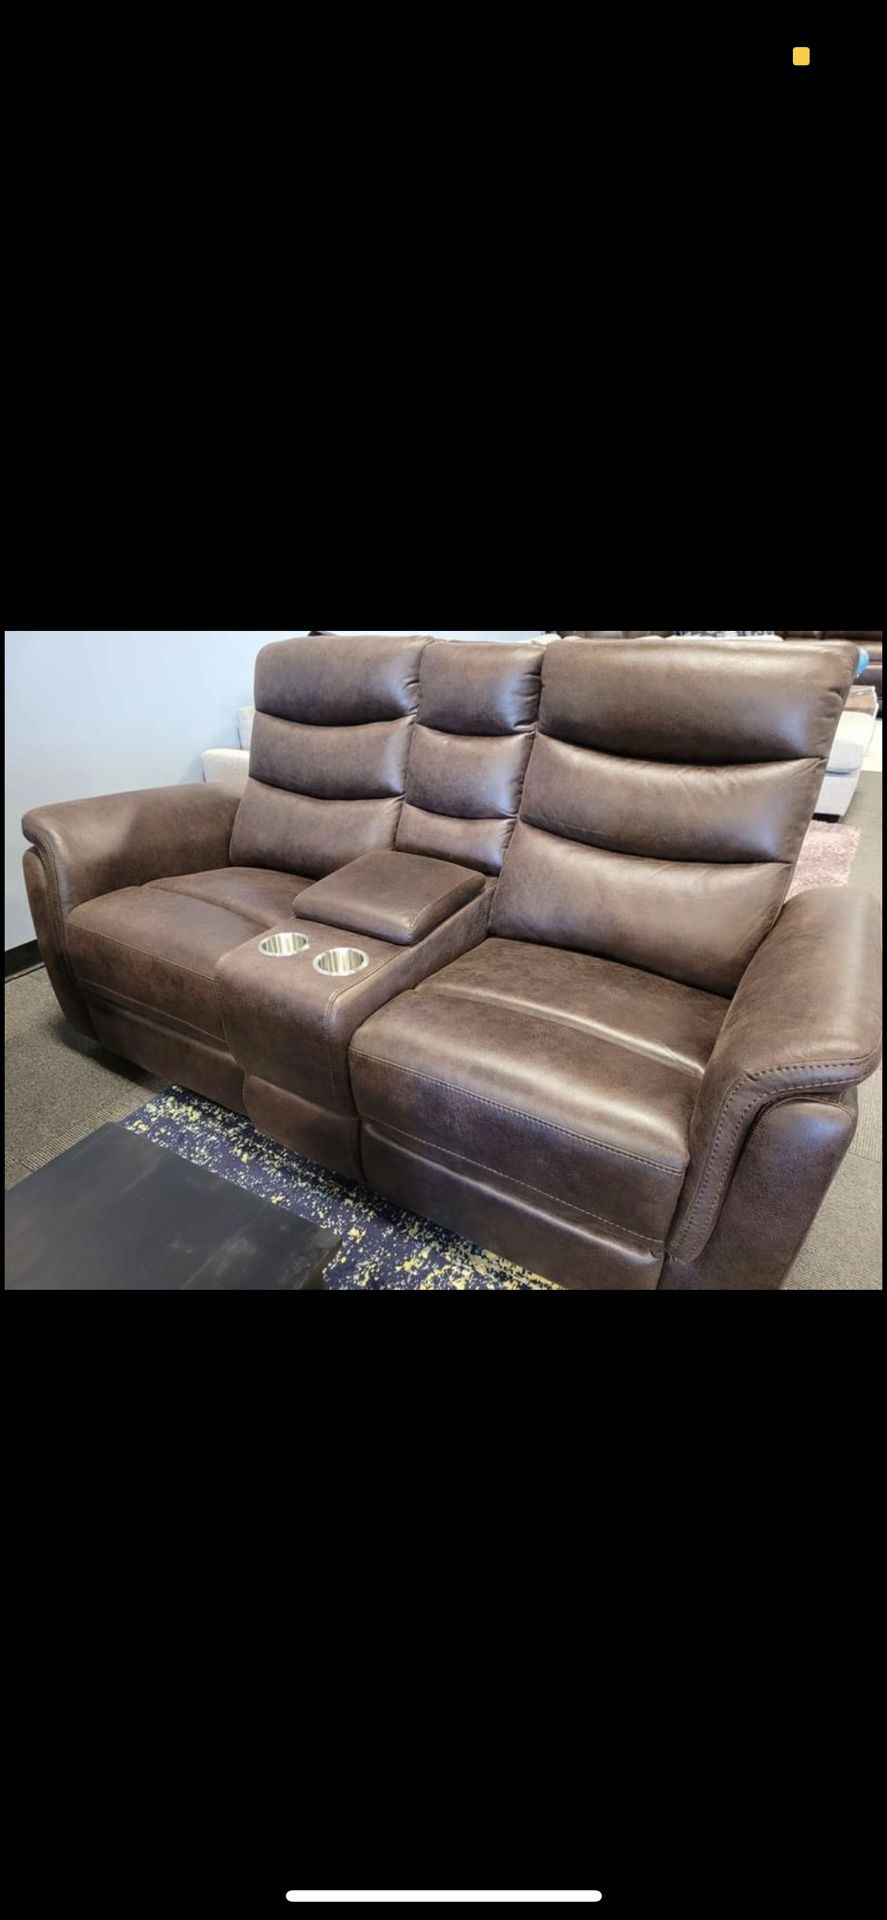 In stock now!! Brand new color - sofa/loveseat/recliner- buy as set or only the pieces you need -